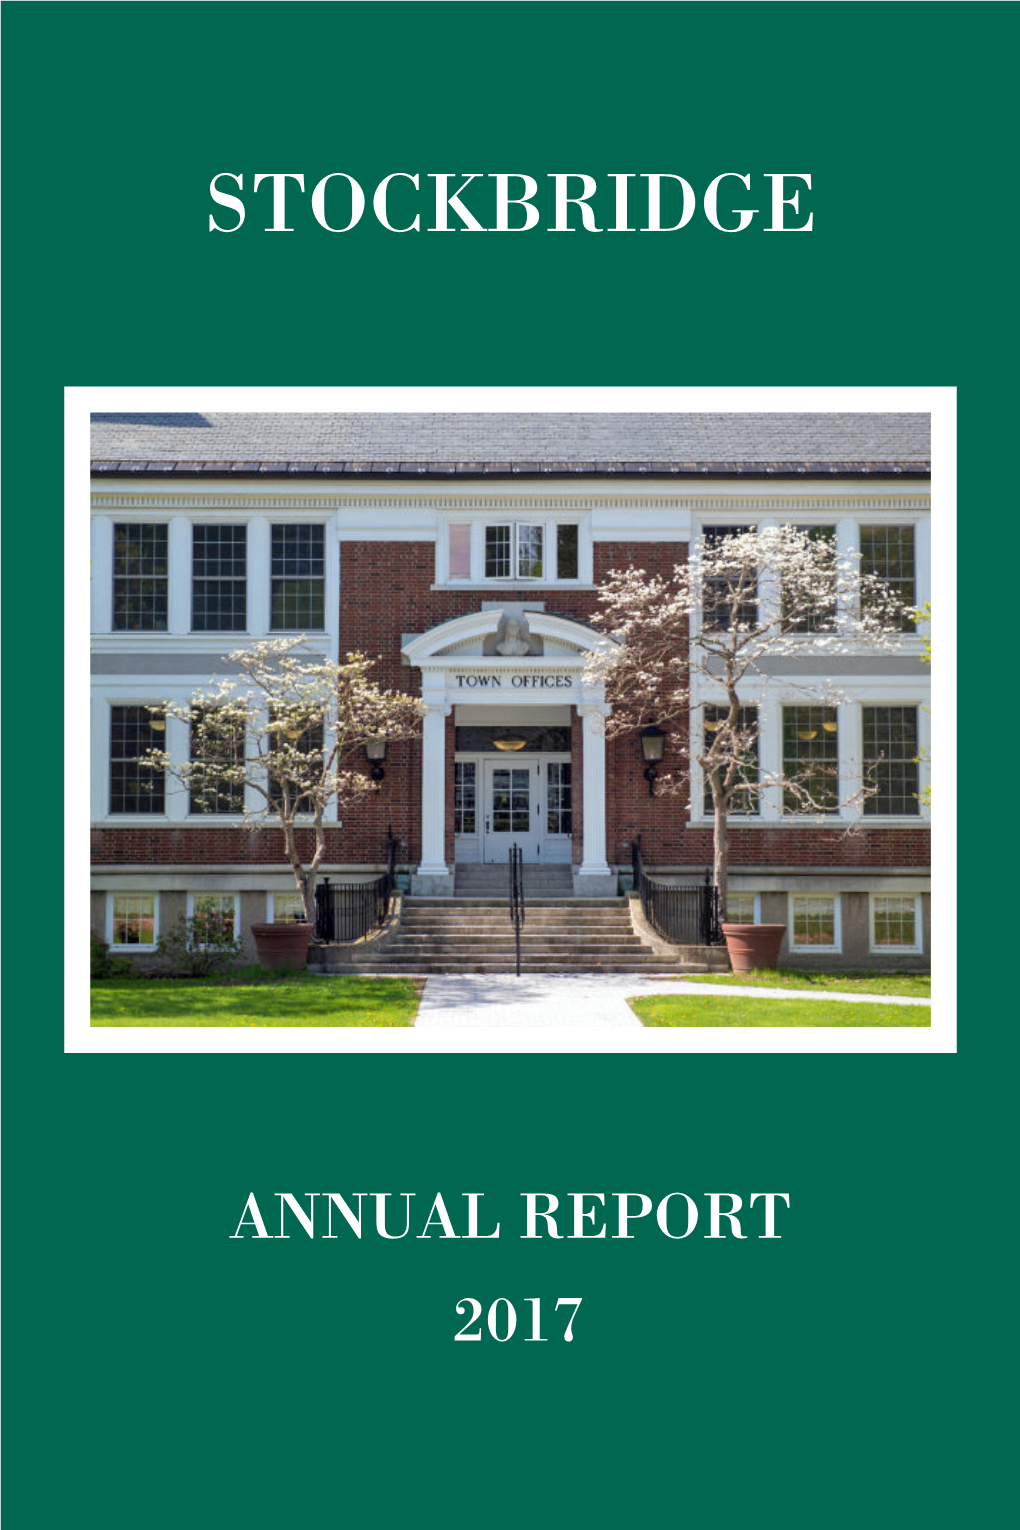 Town Report 2017